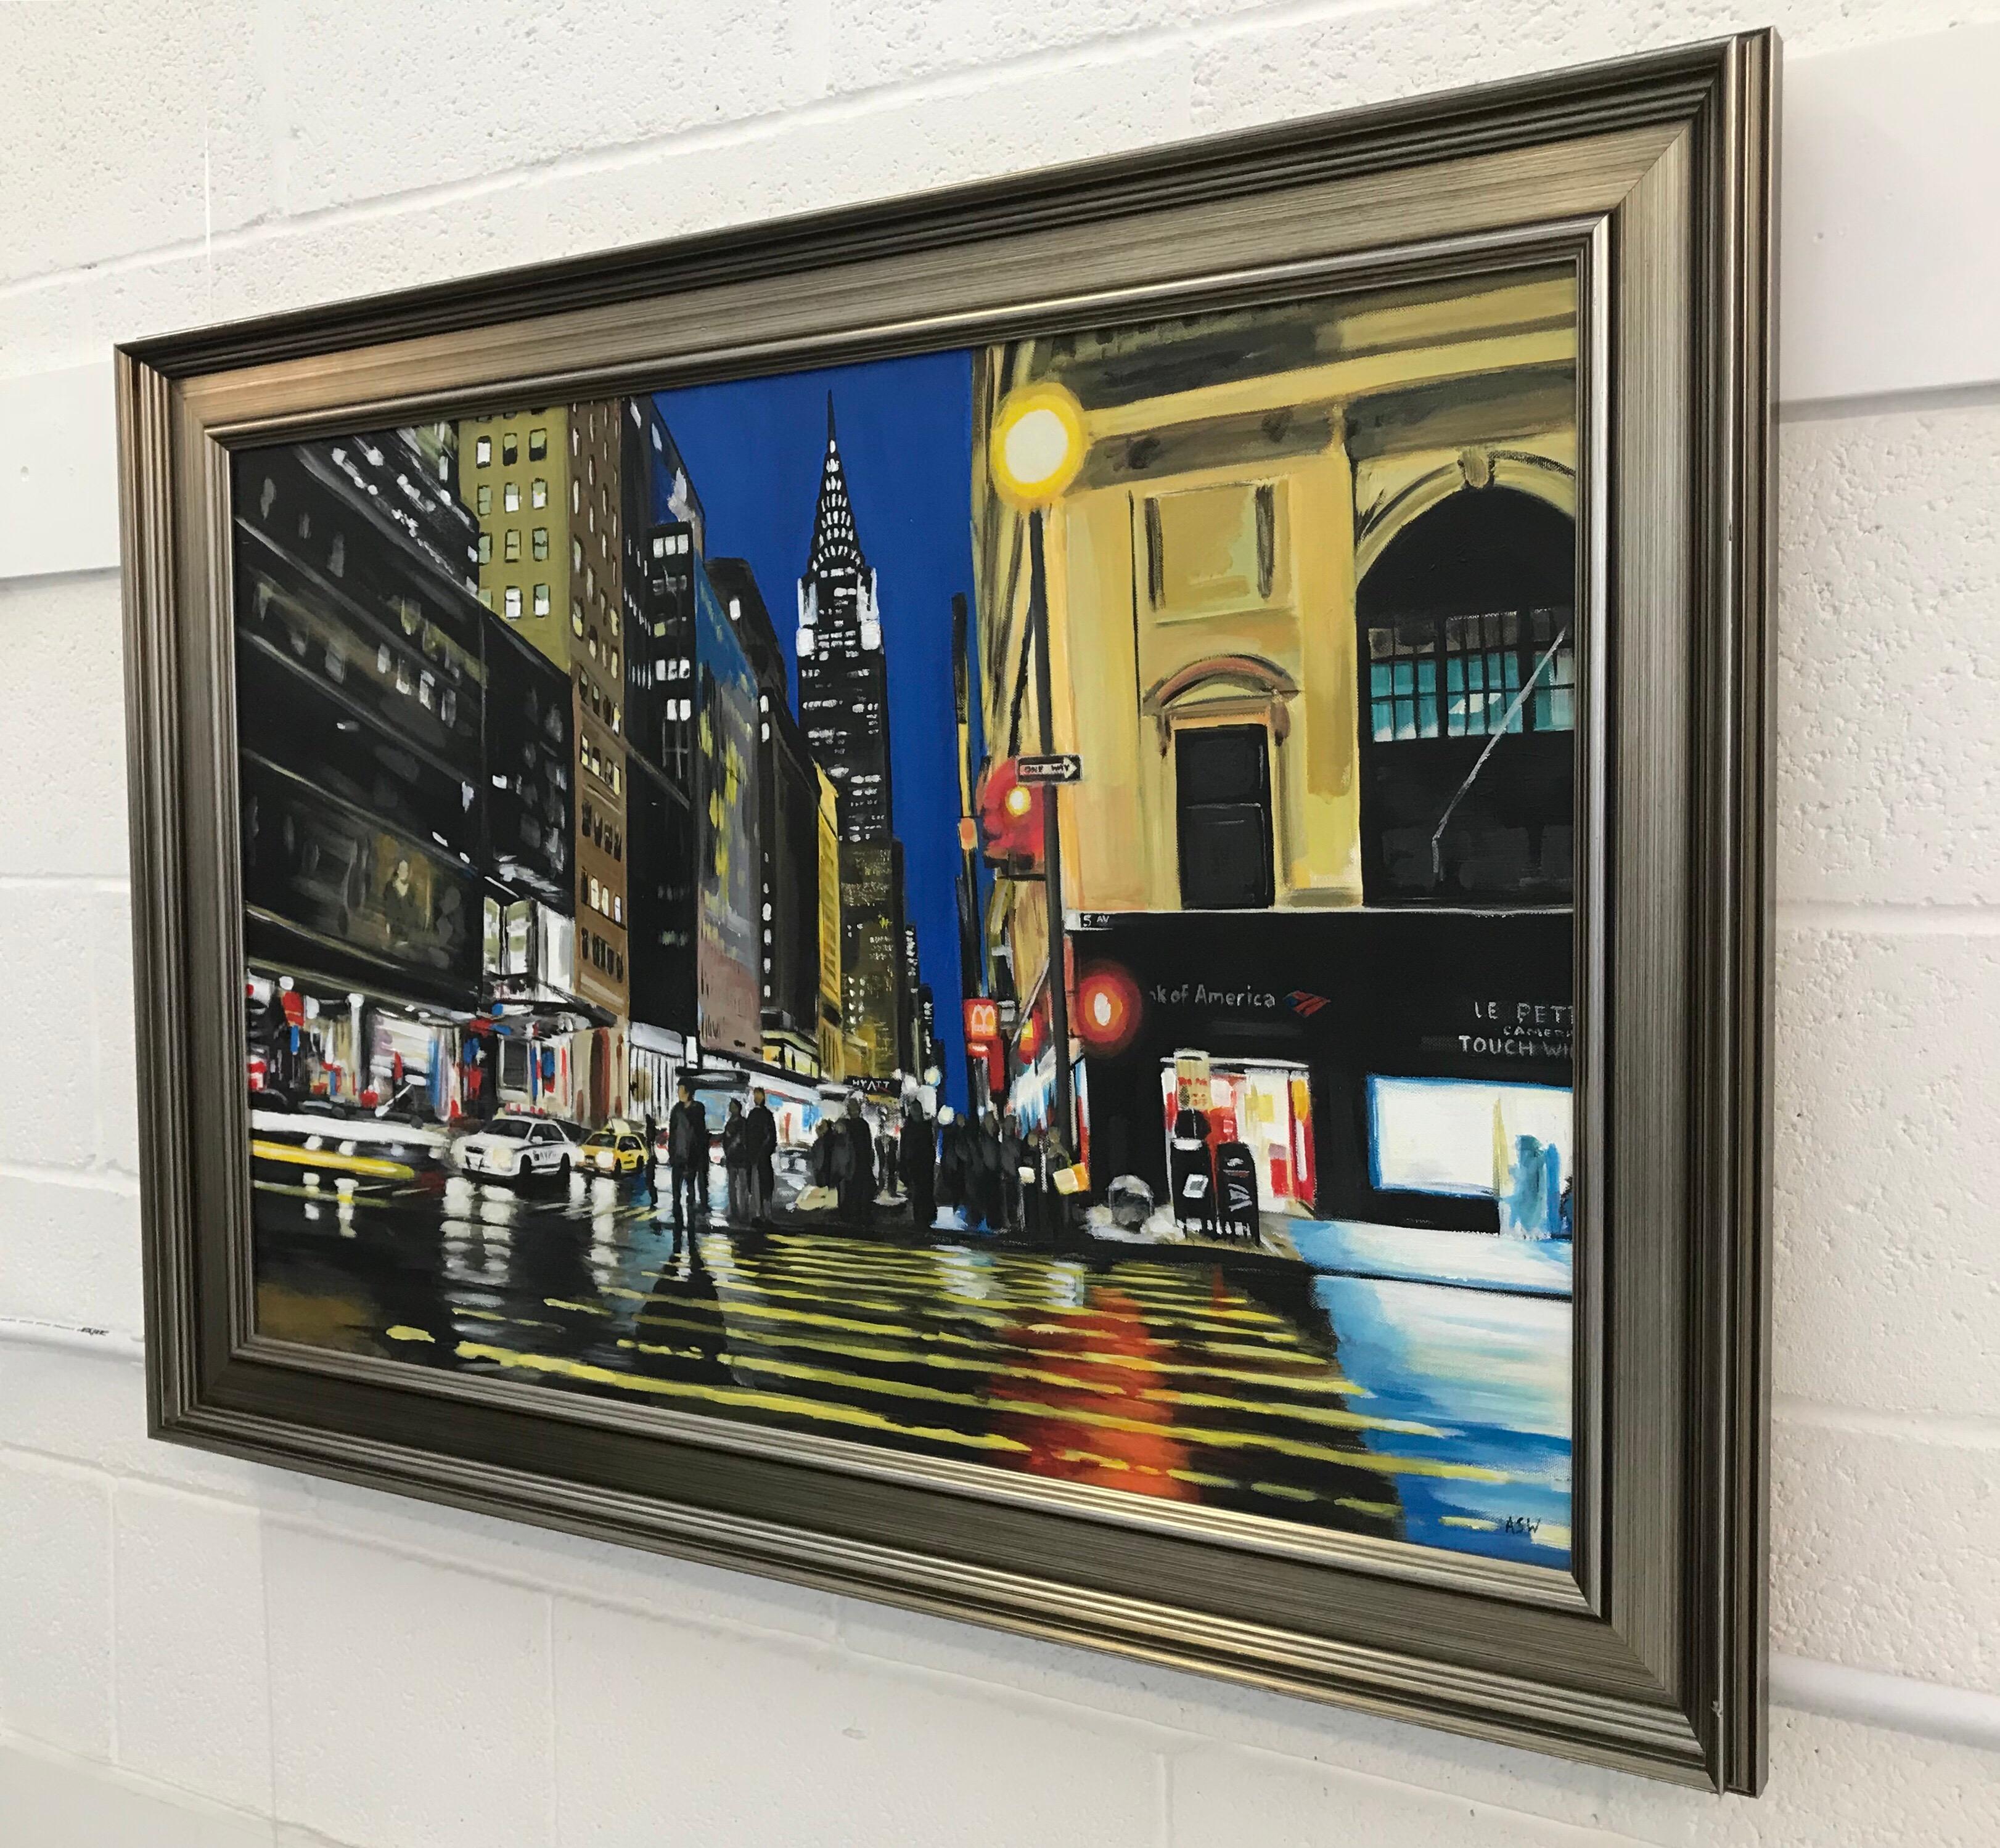 Original Painting of the Chrysler Building, New York City, by British Urban Landscape Artist, Angela Wakefield.

Art measures 36 x 24 inches
Frame measures 43 x 31 inches

Angela Wakefield has twice been on the front cover of ‘Art of England’ and